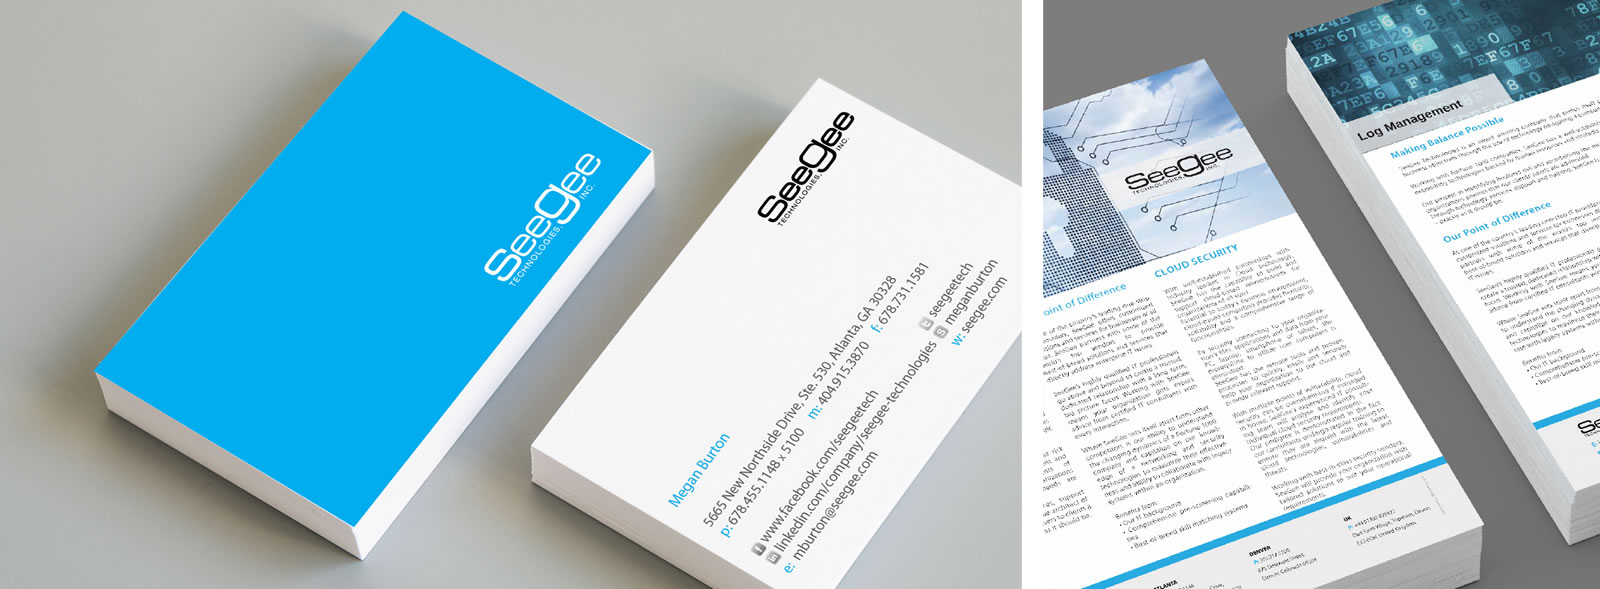 Seege Business Cards and Letterhead